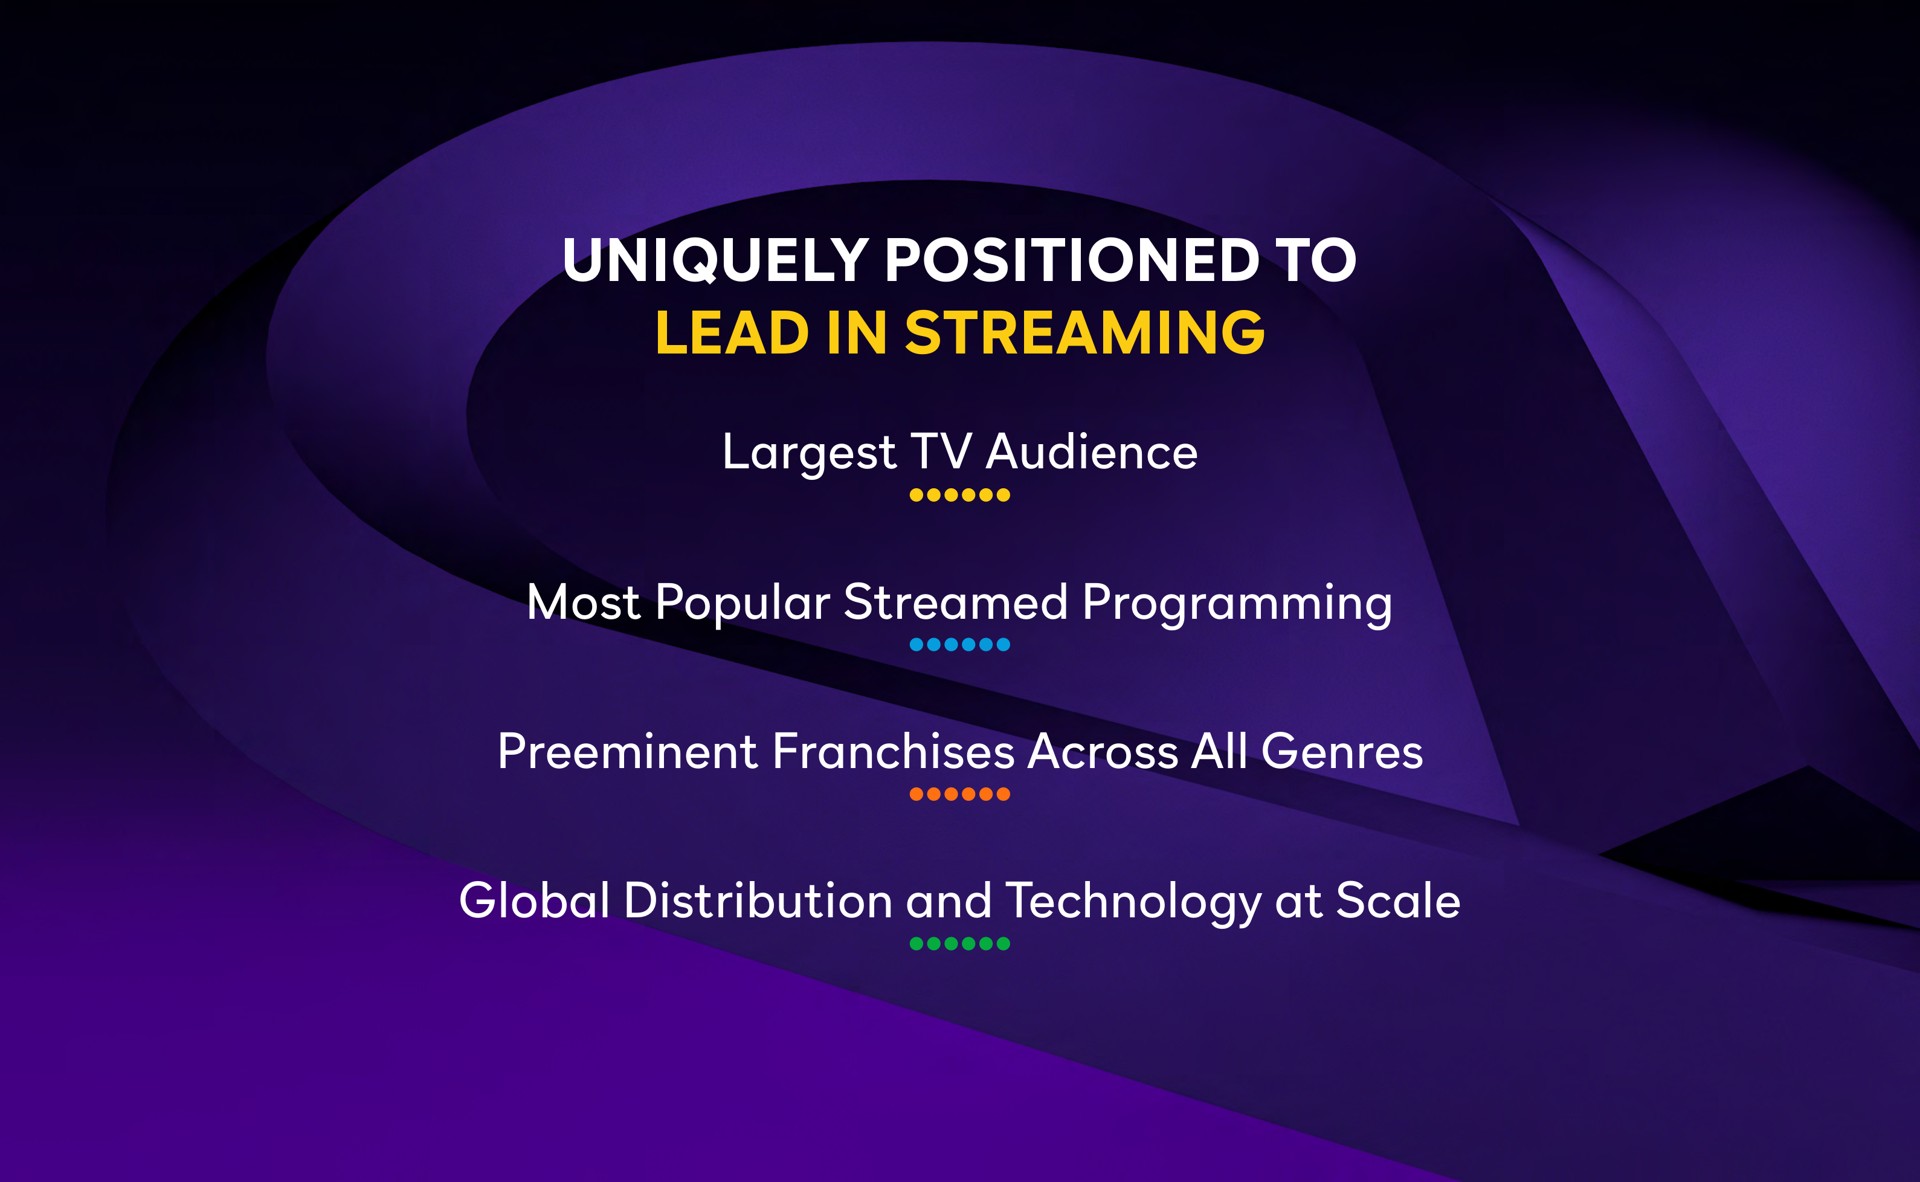 uniquely positioned to lead in streaming audience most popular streamed programming franchises across all genres global distribution and technology at scale | Comcast